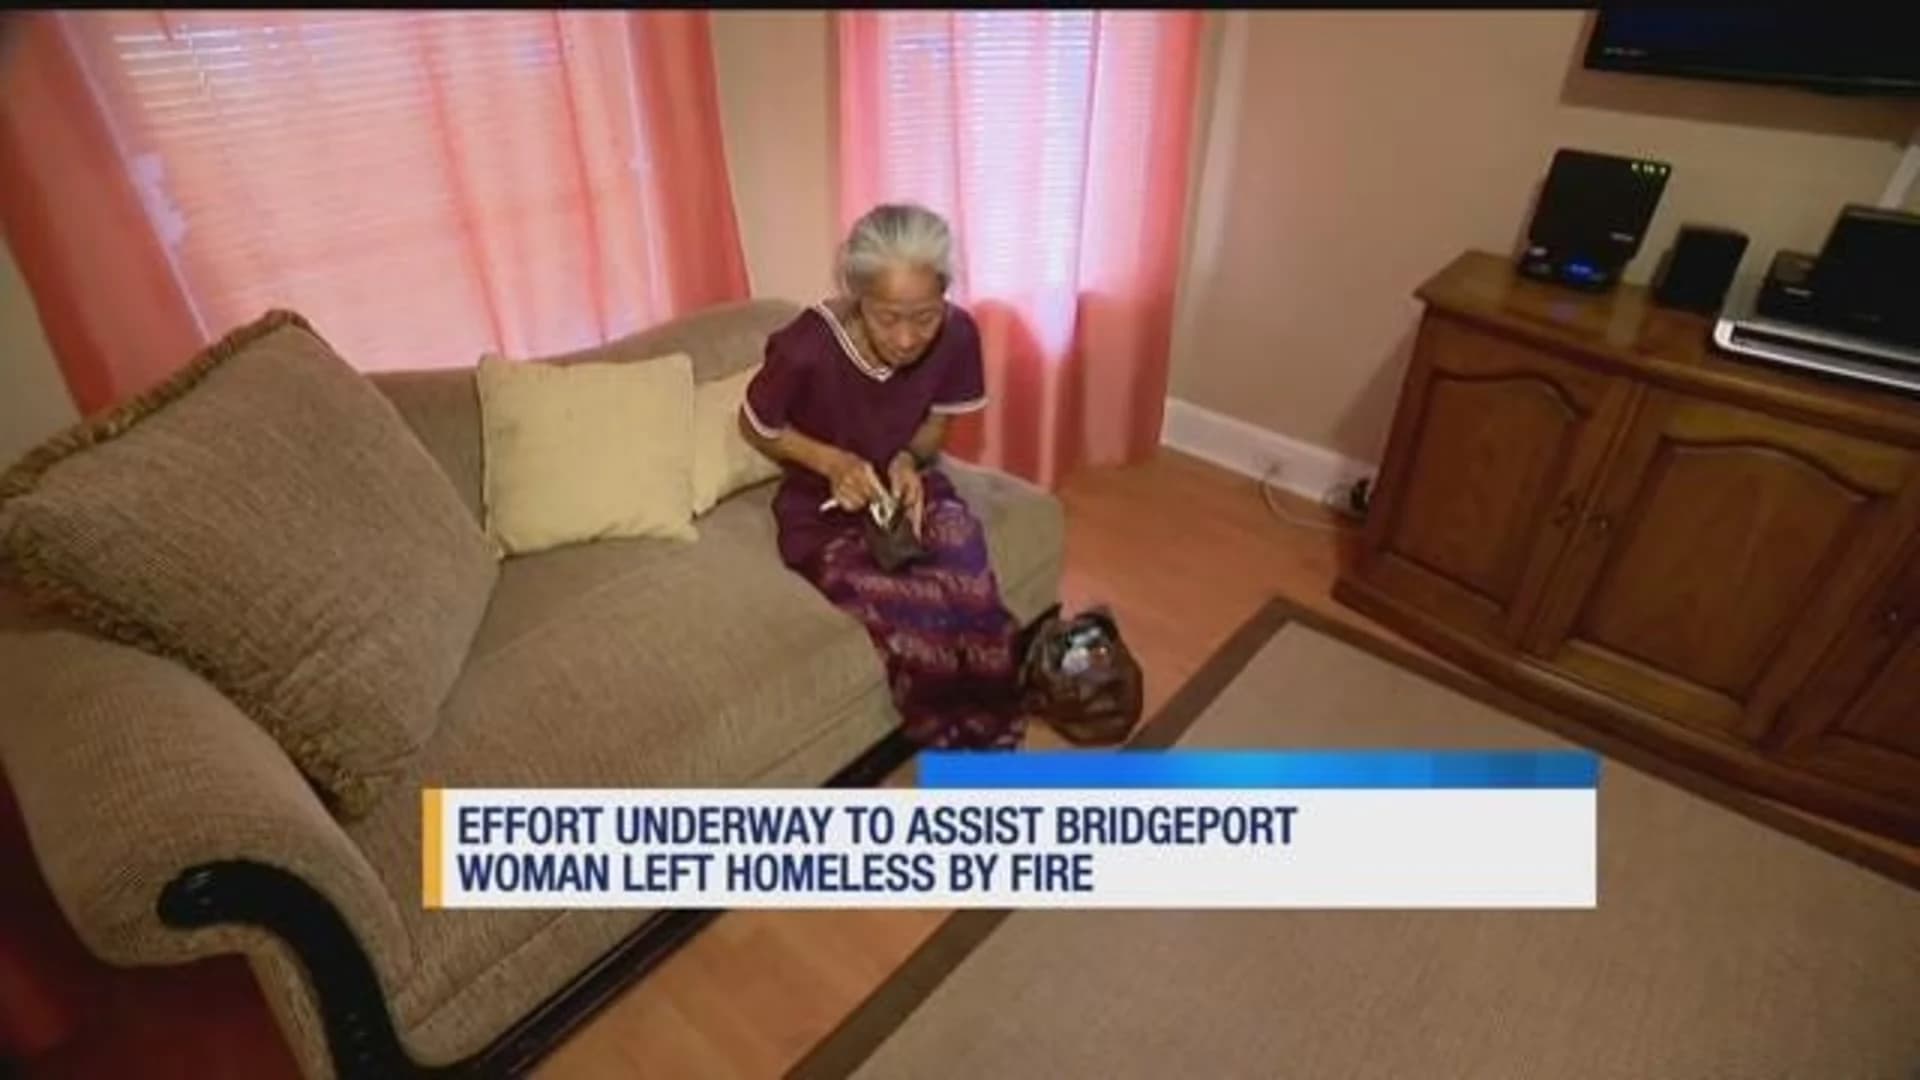 Bridgeport woman left homeless by fire in need of help